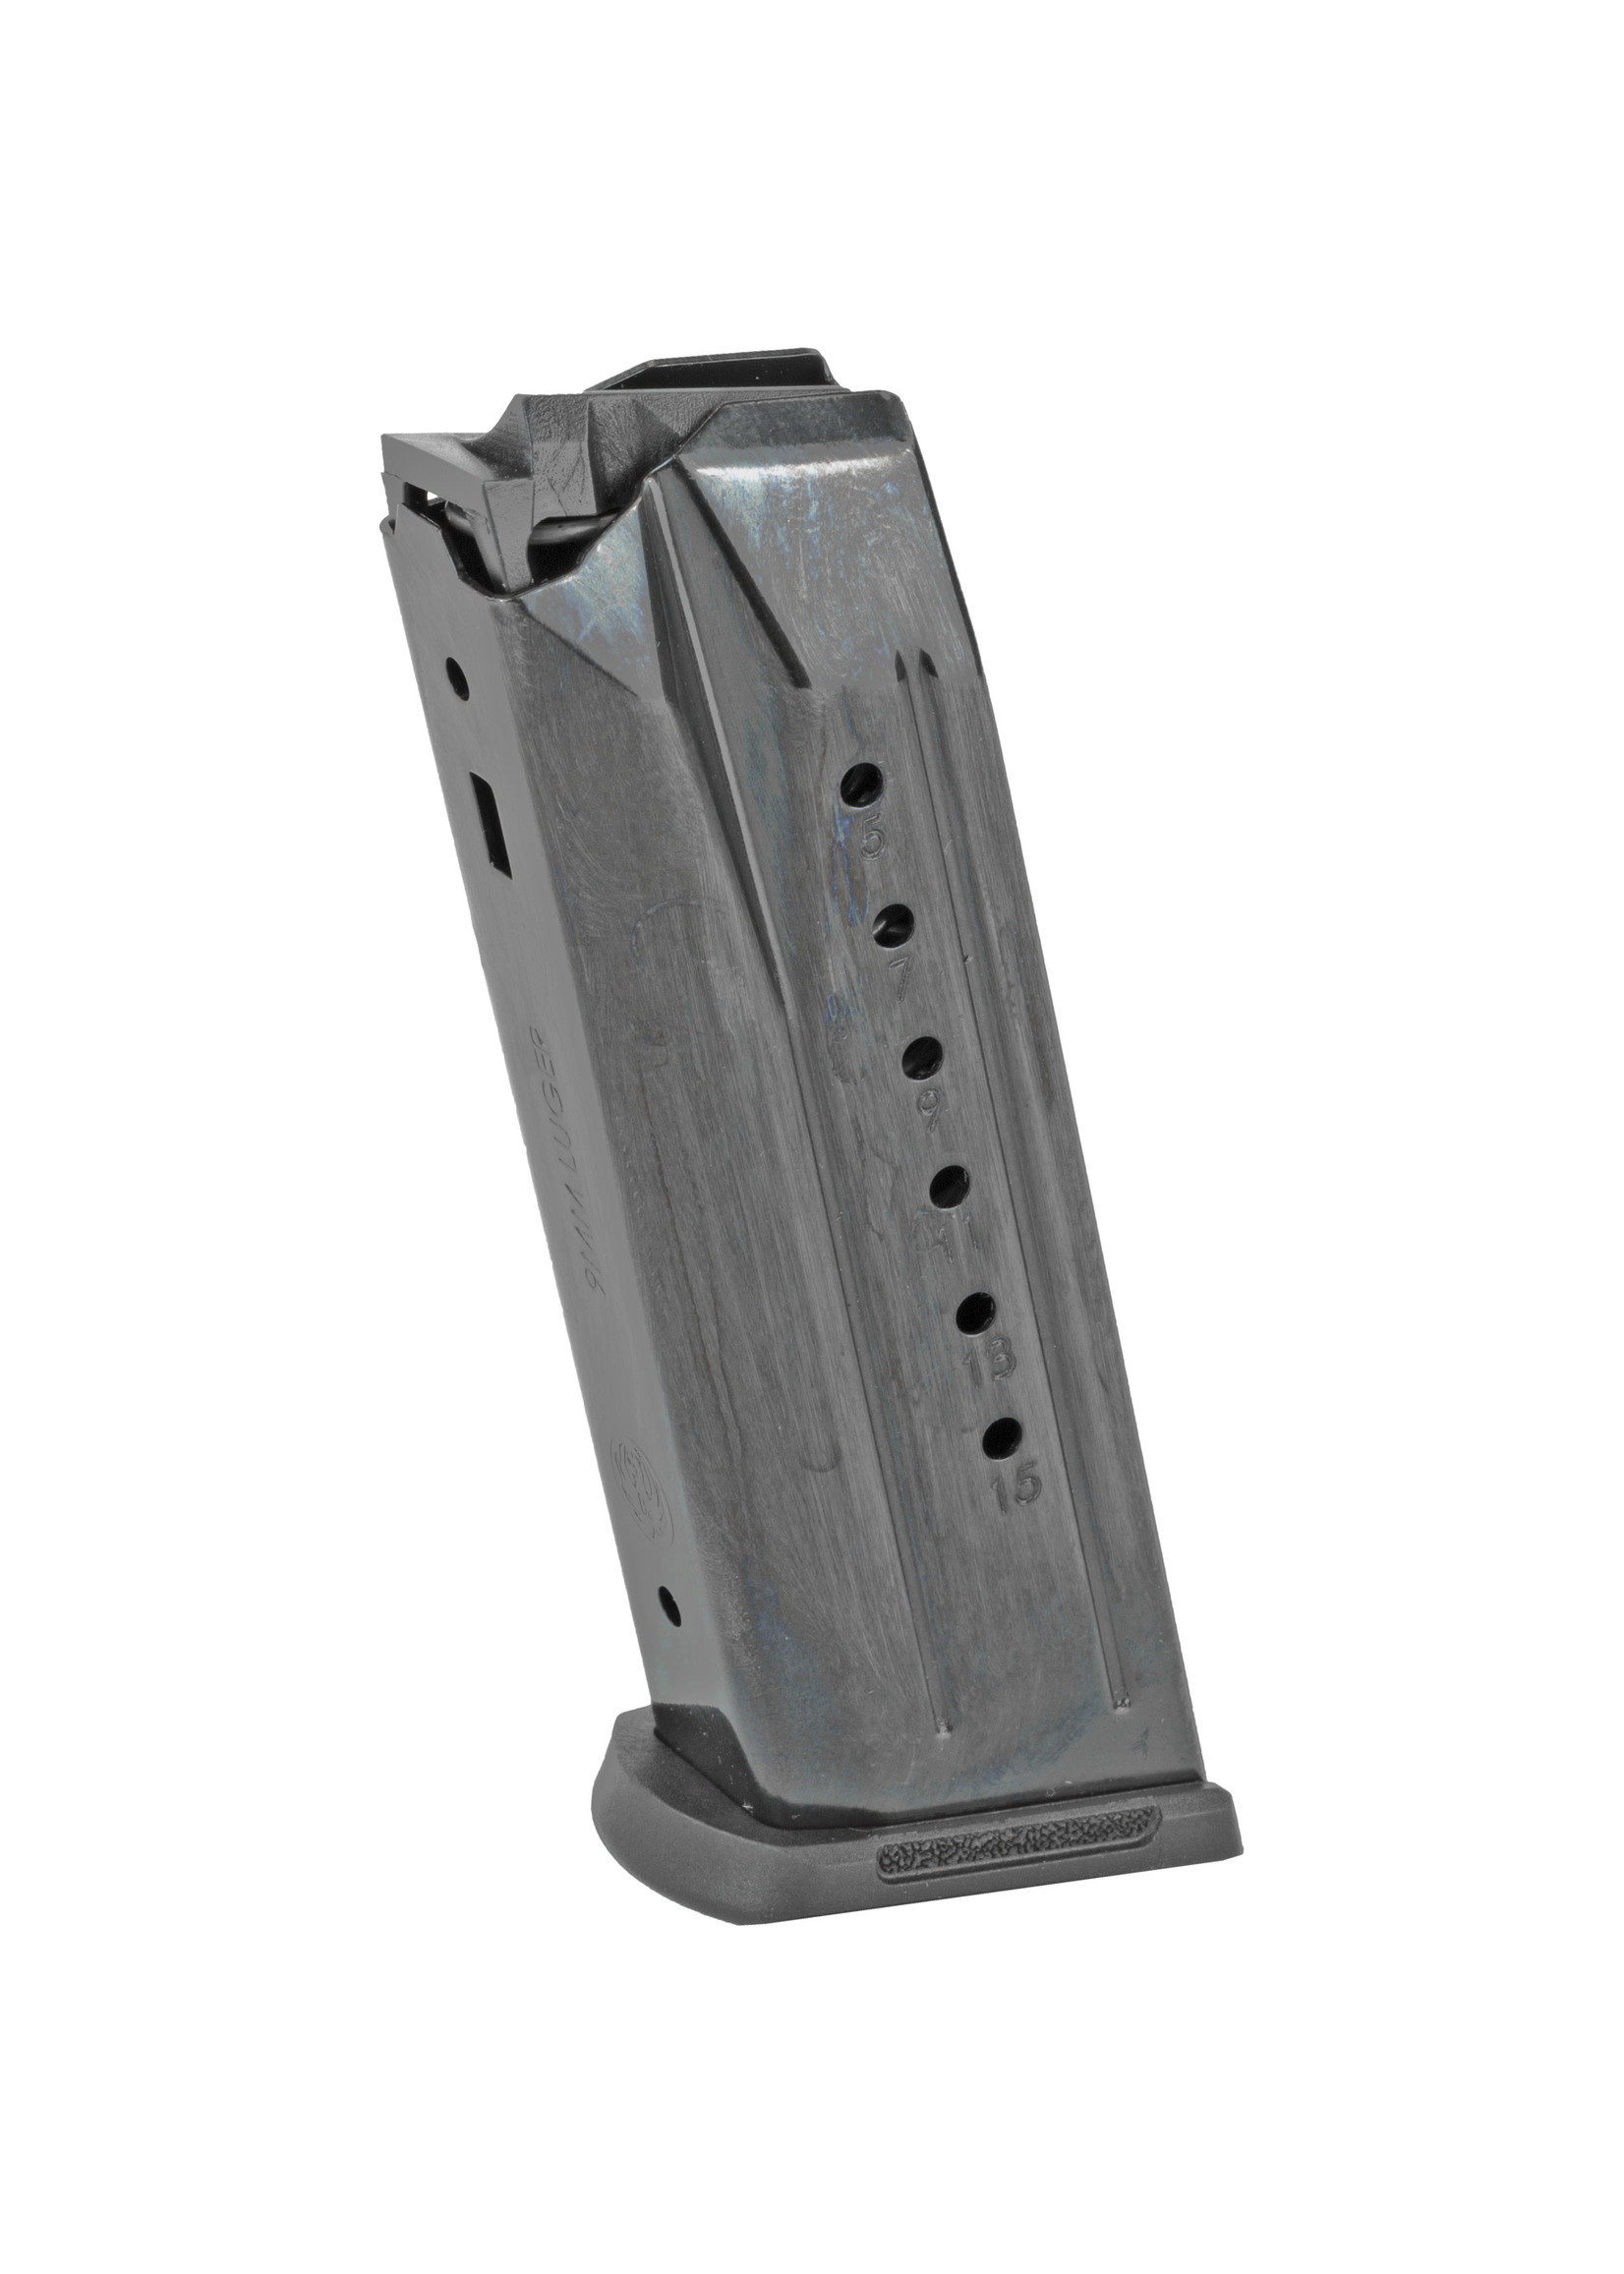 Ruger Ruger Security 9 15-Round Factory Magazine